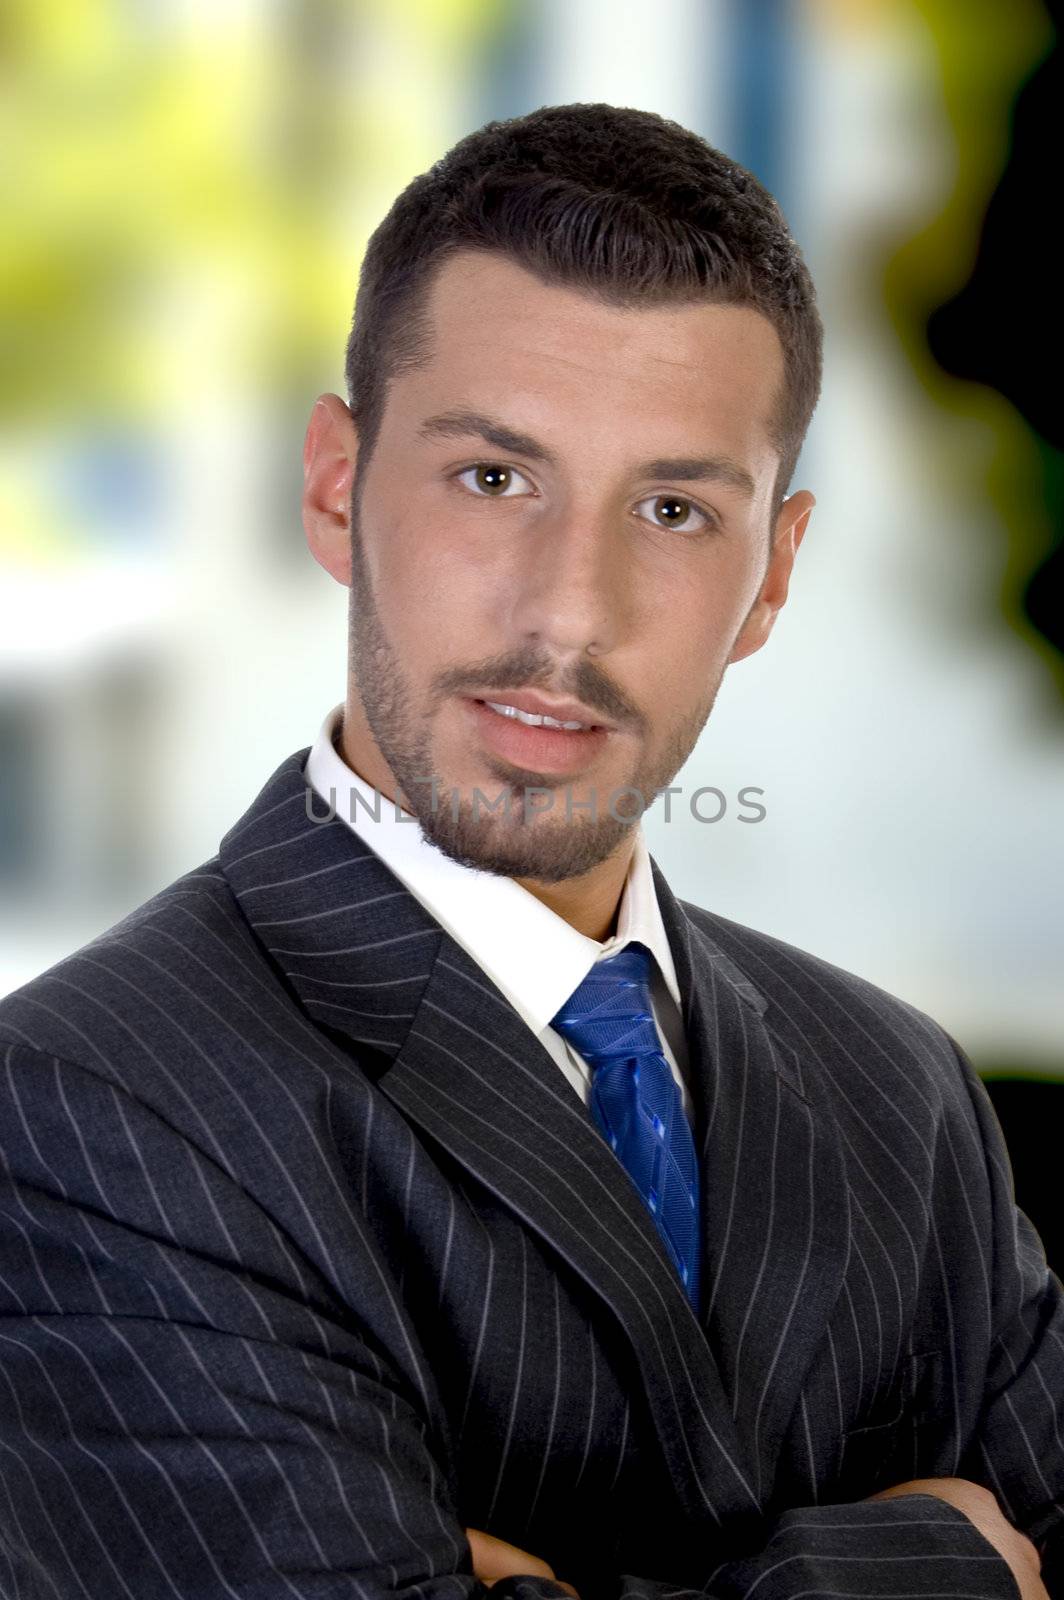 portrait of businessman on an abstract background